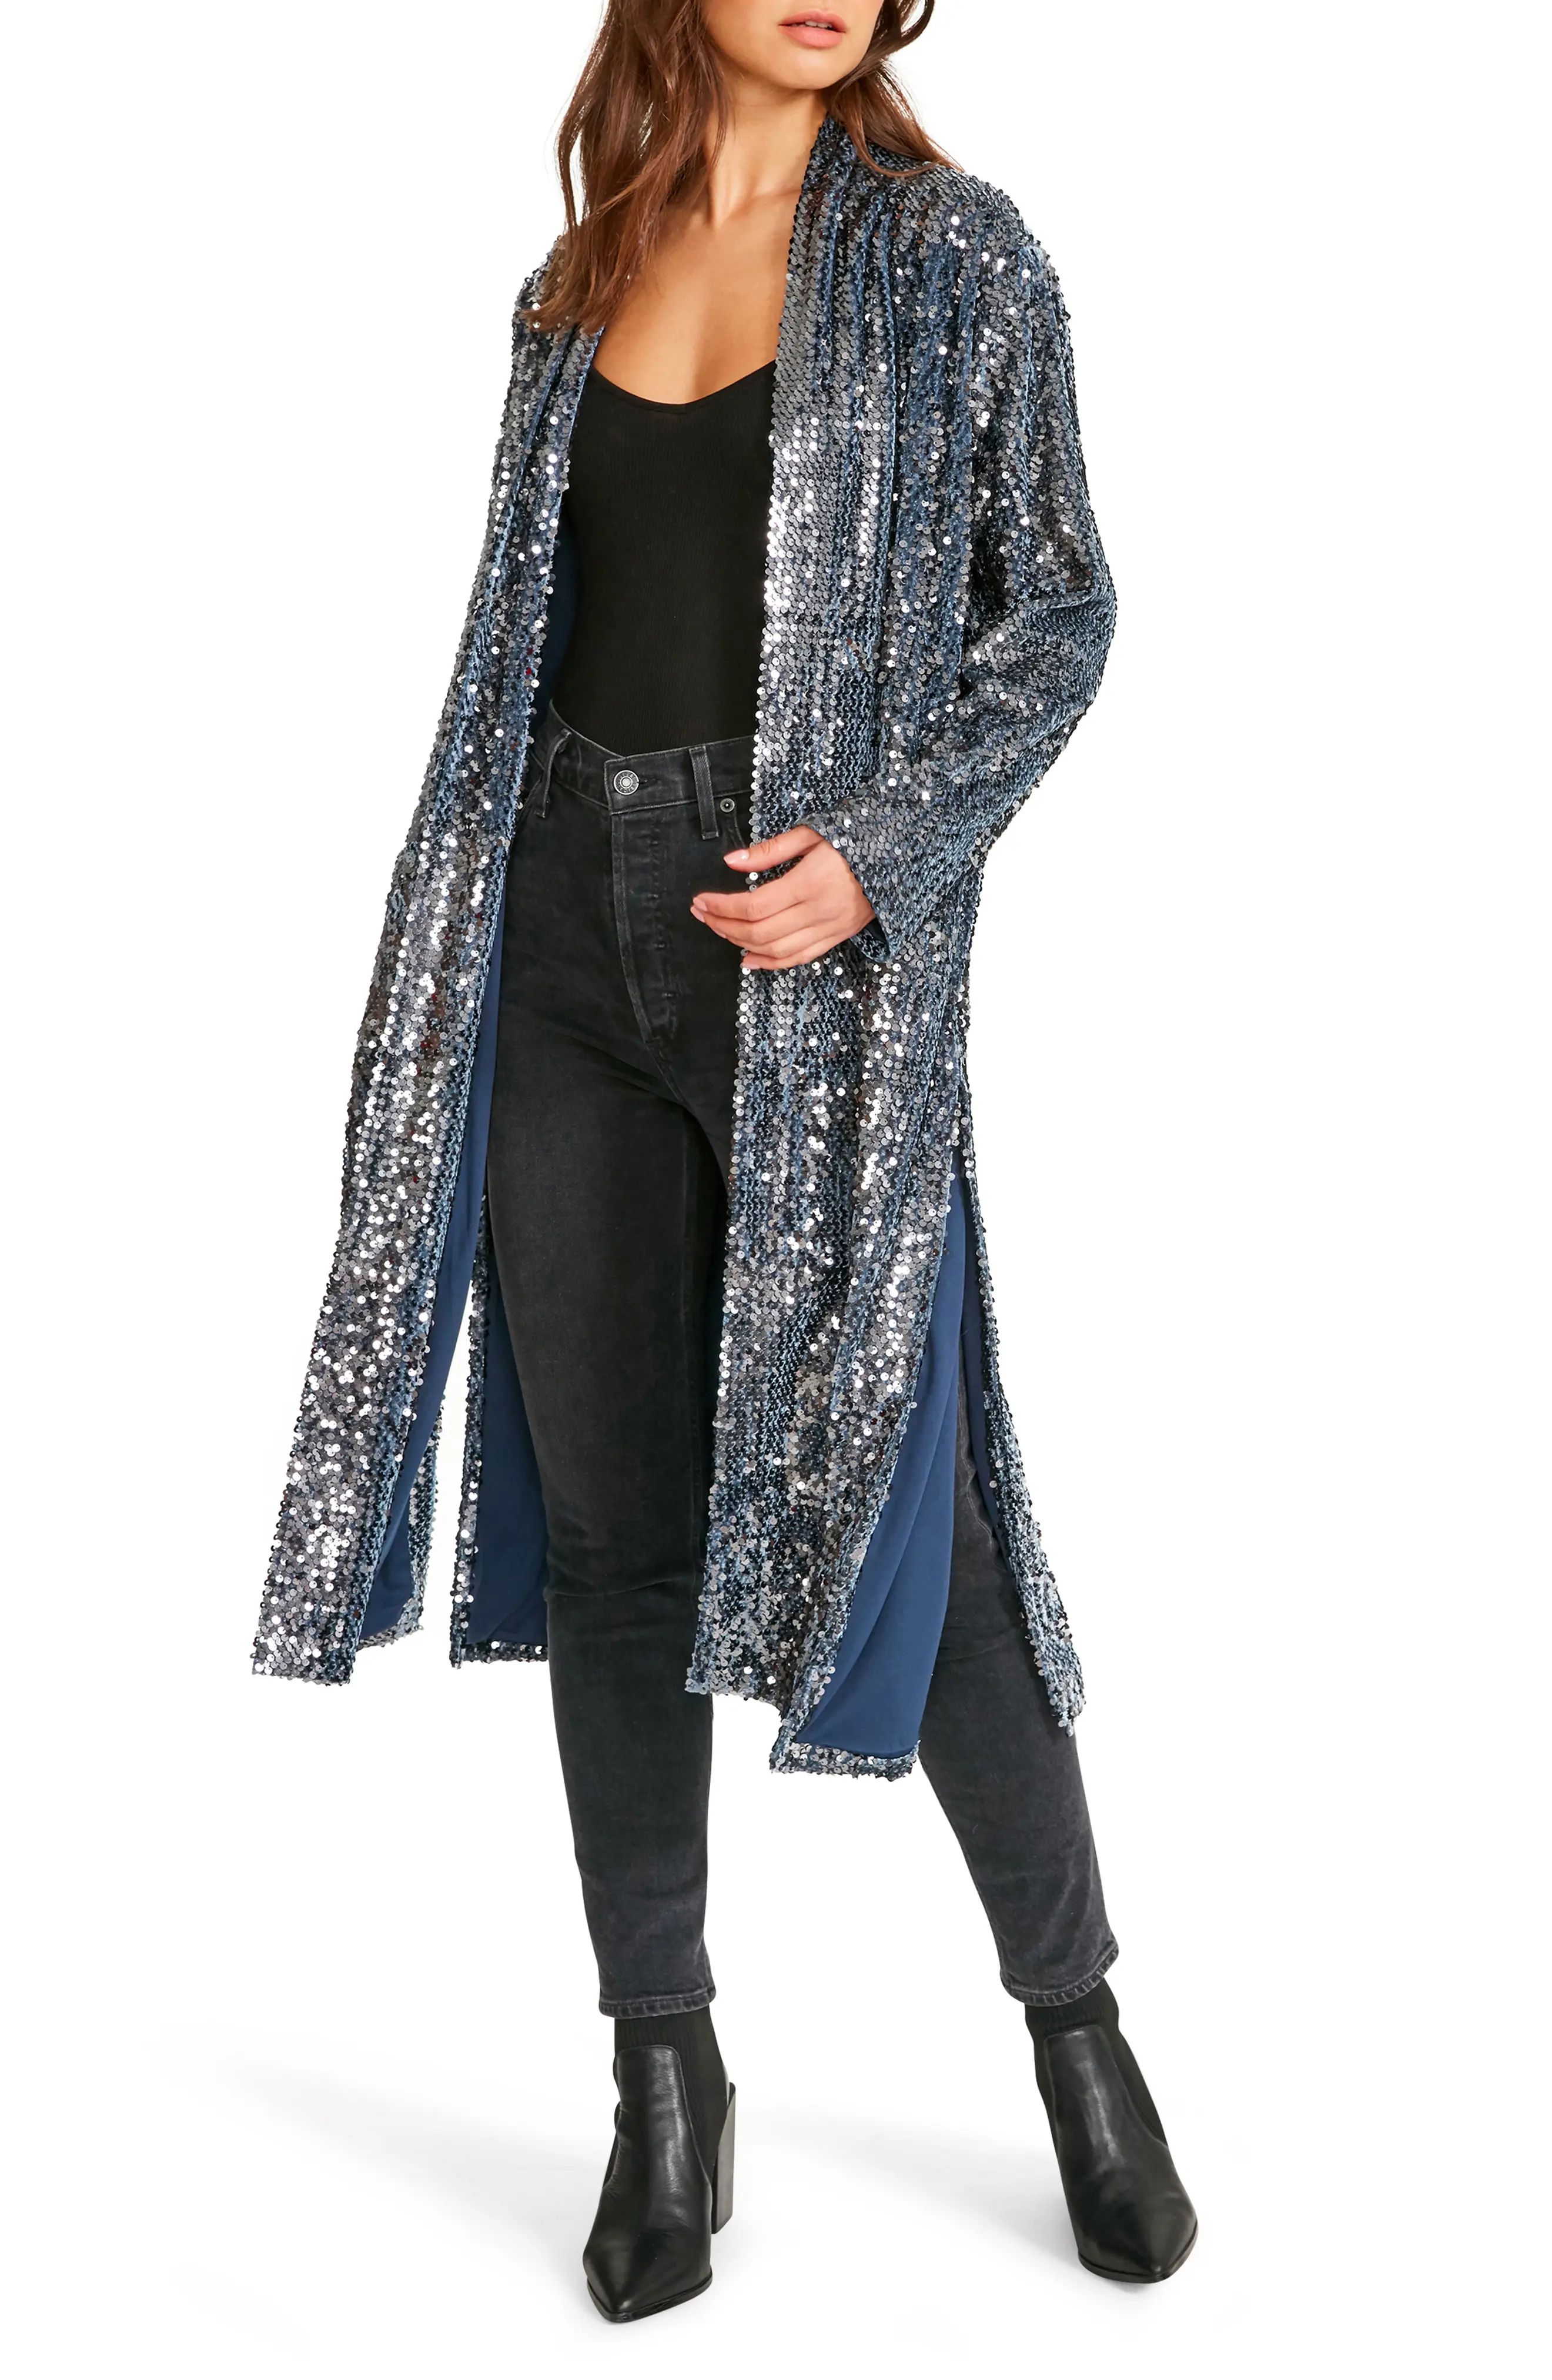 BB Dakota by Steve Madden Hat Trick Sequin Duster Jacket, Size X-Small in Thunderstorm at Nordstrom | Nordstrom